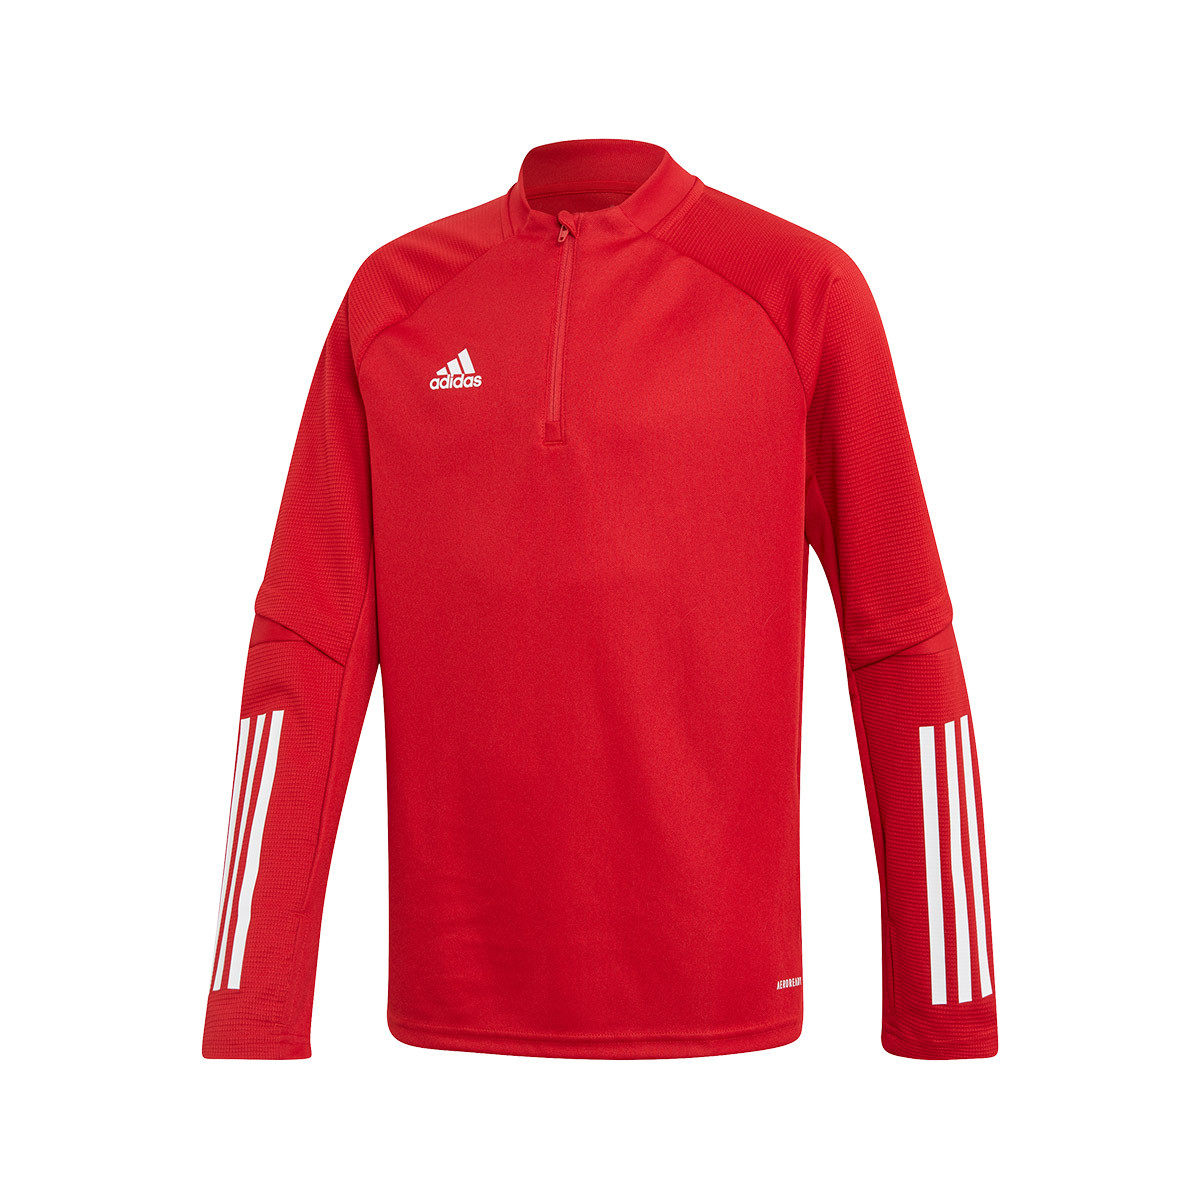 red adidas training top